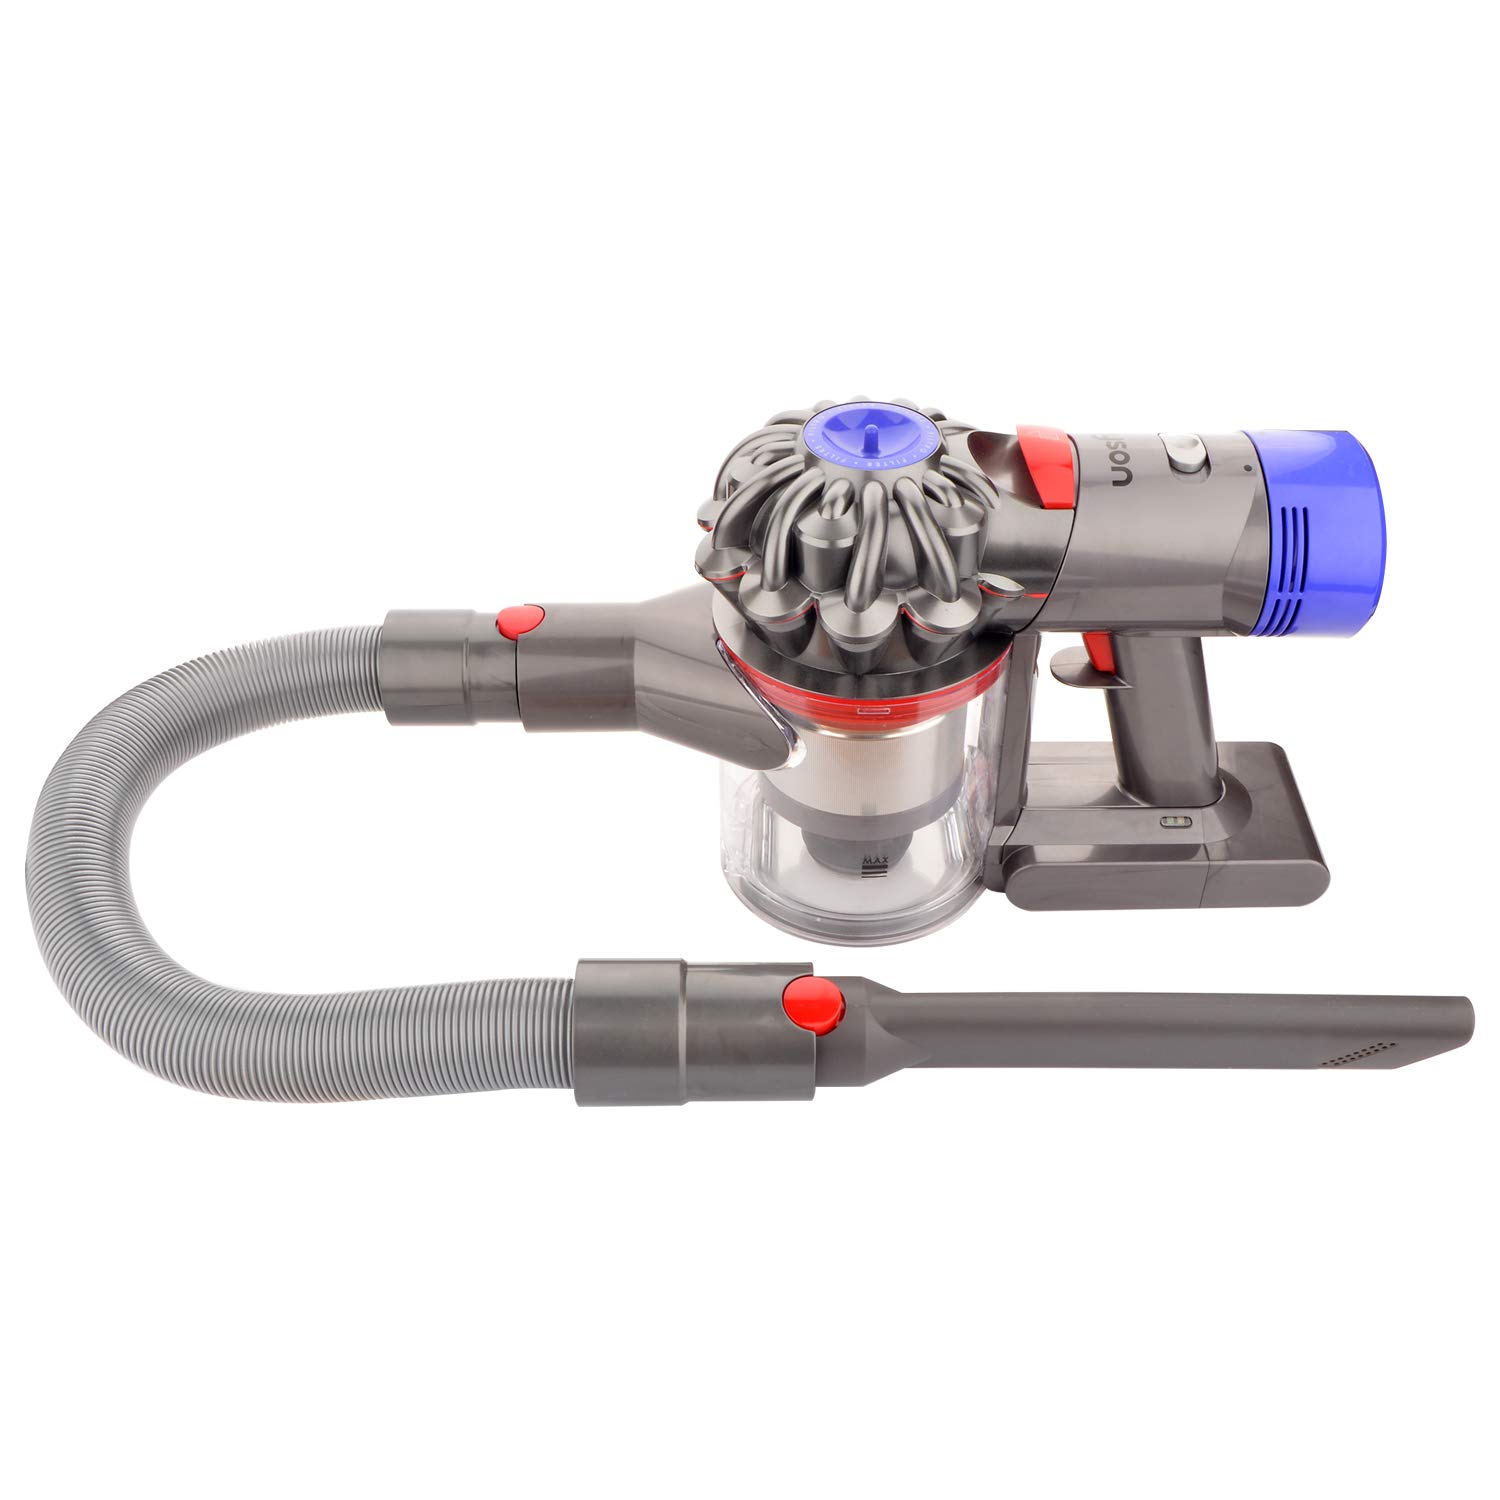 Fullclean Extension Hose and Crevice Tool Compatible with Dyson Gen 5 V15 V12 V11 V10 V7 V8 Absolute Detect Torque Drive Cyclone Cordless Handheld Vacuum Cleaner